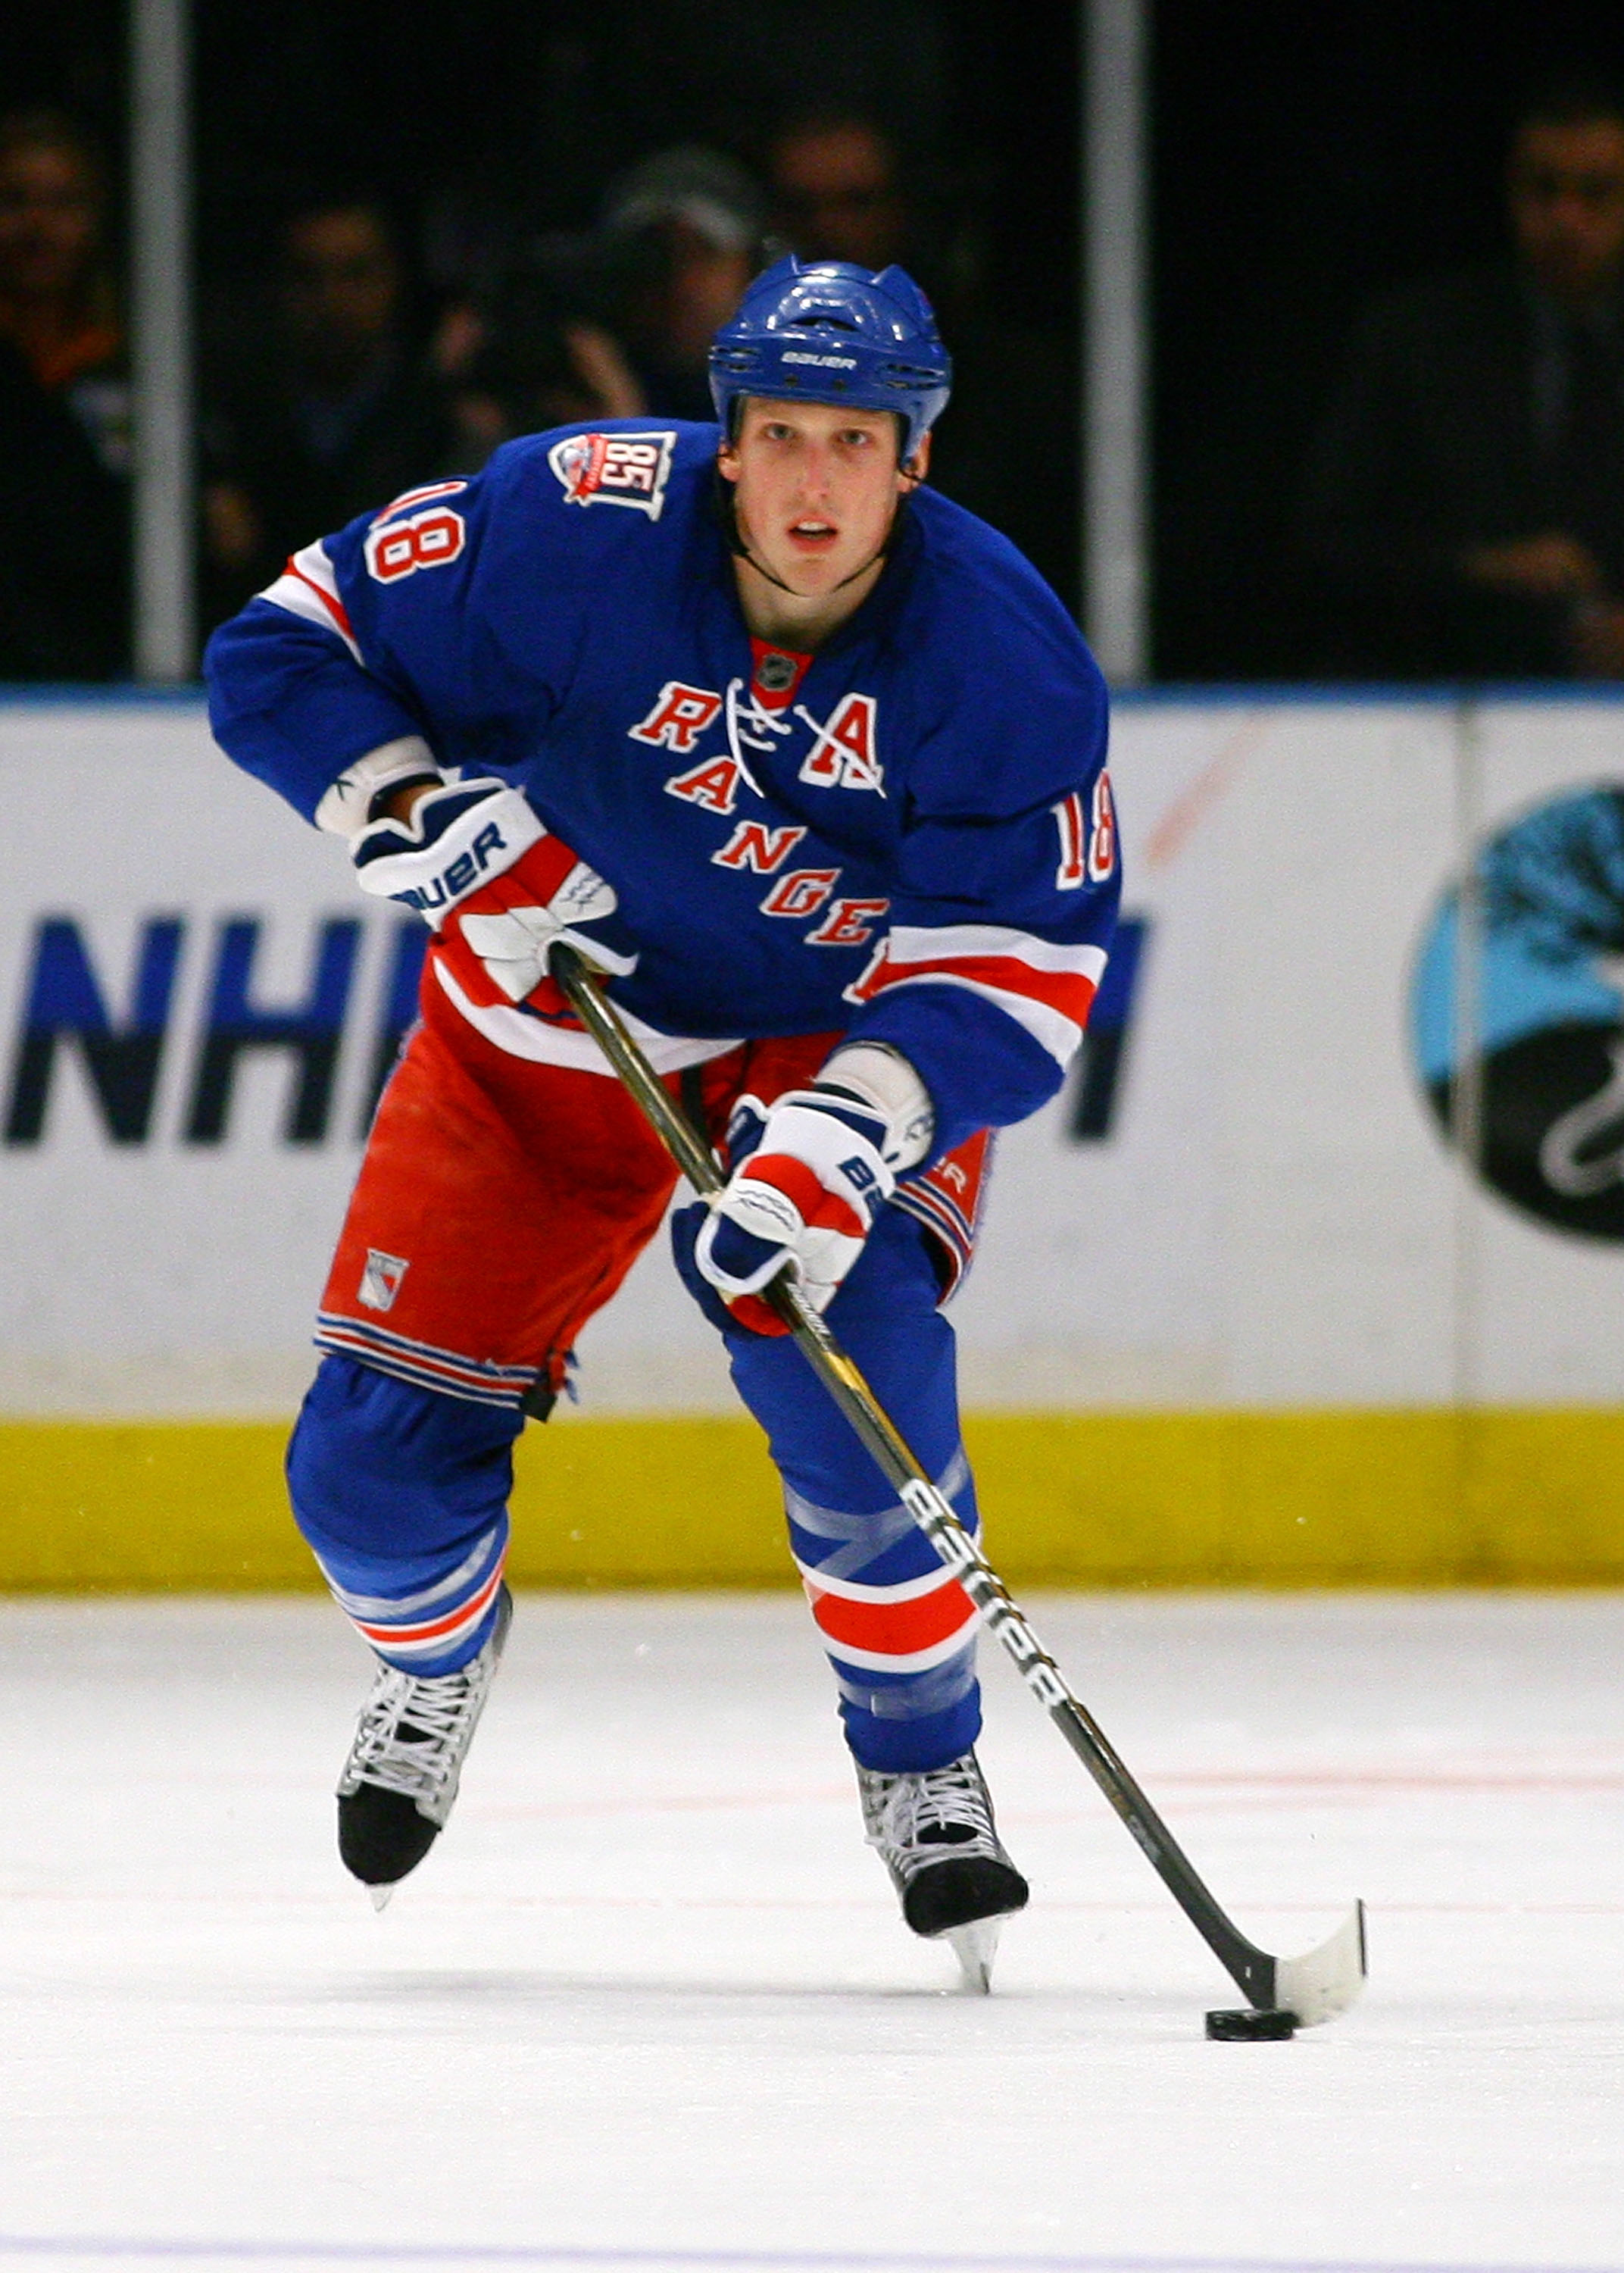 New York Rangers Player Marc Staal Took a Slap Shot to the Eye [VIDEO]